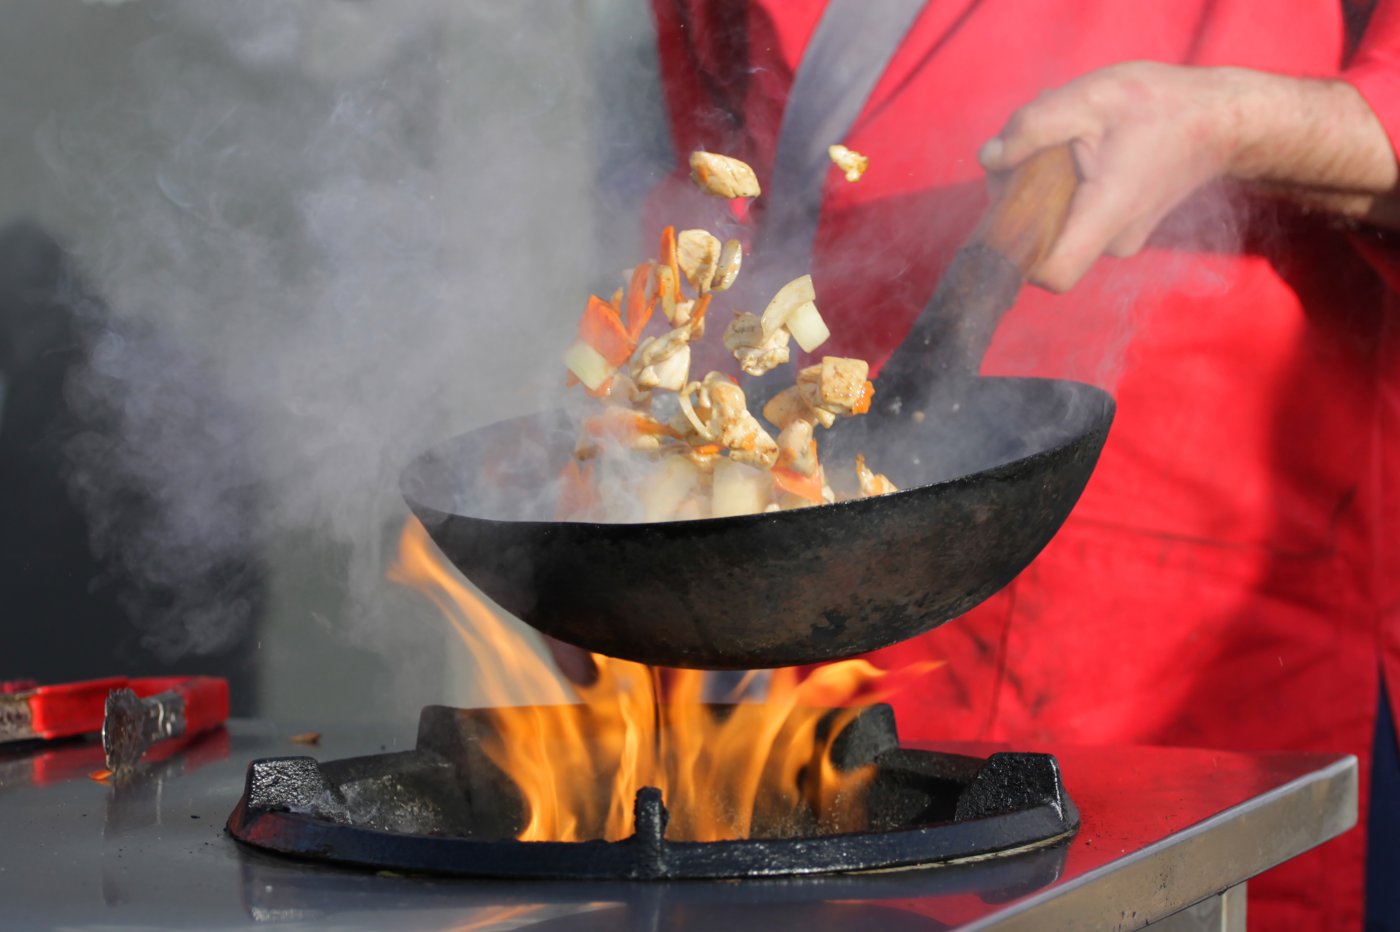 Outside cooking - a chef pan-fries chicken over a wok with flames and smoke